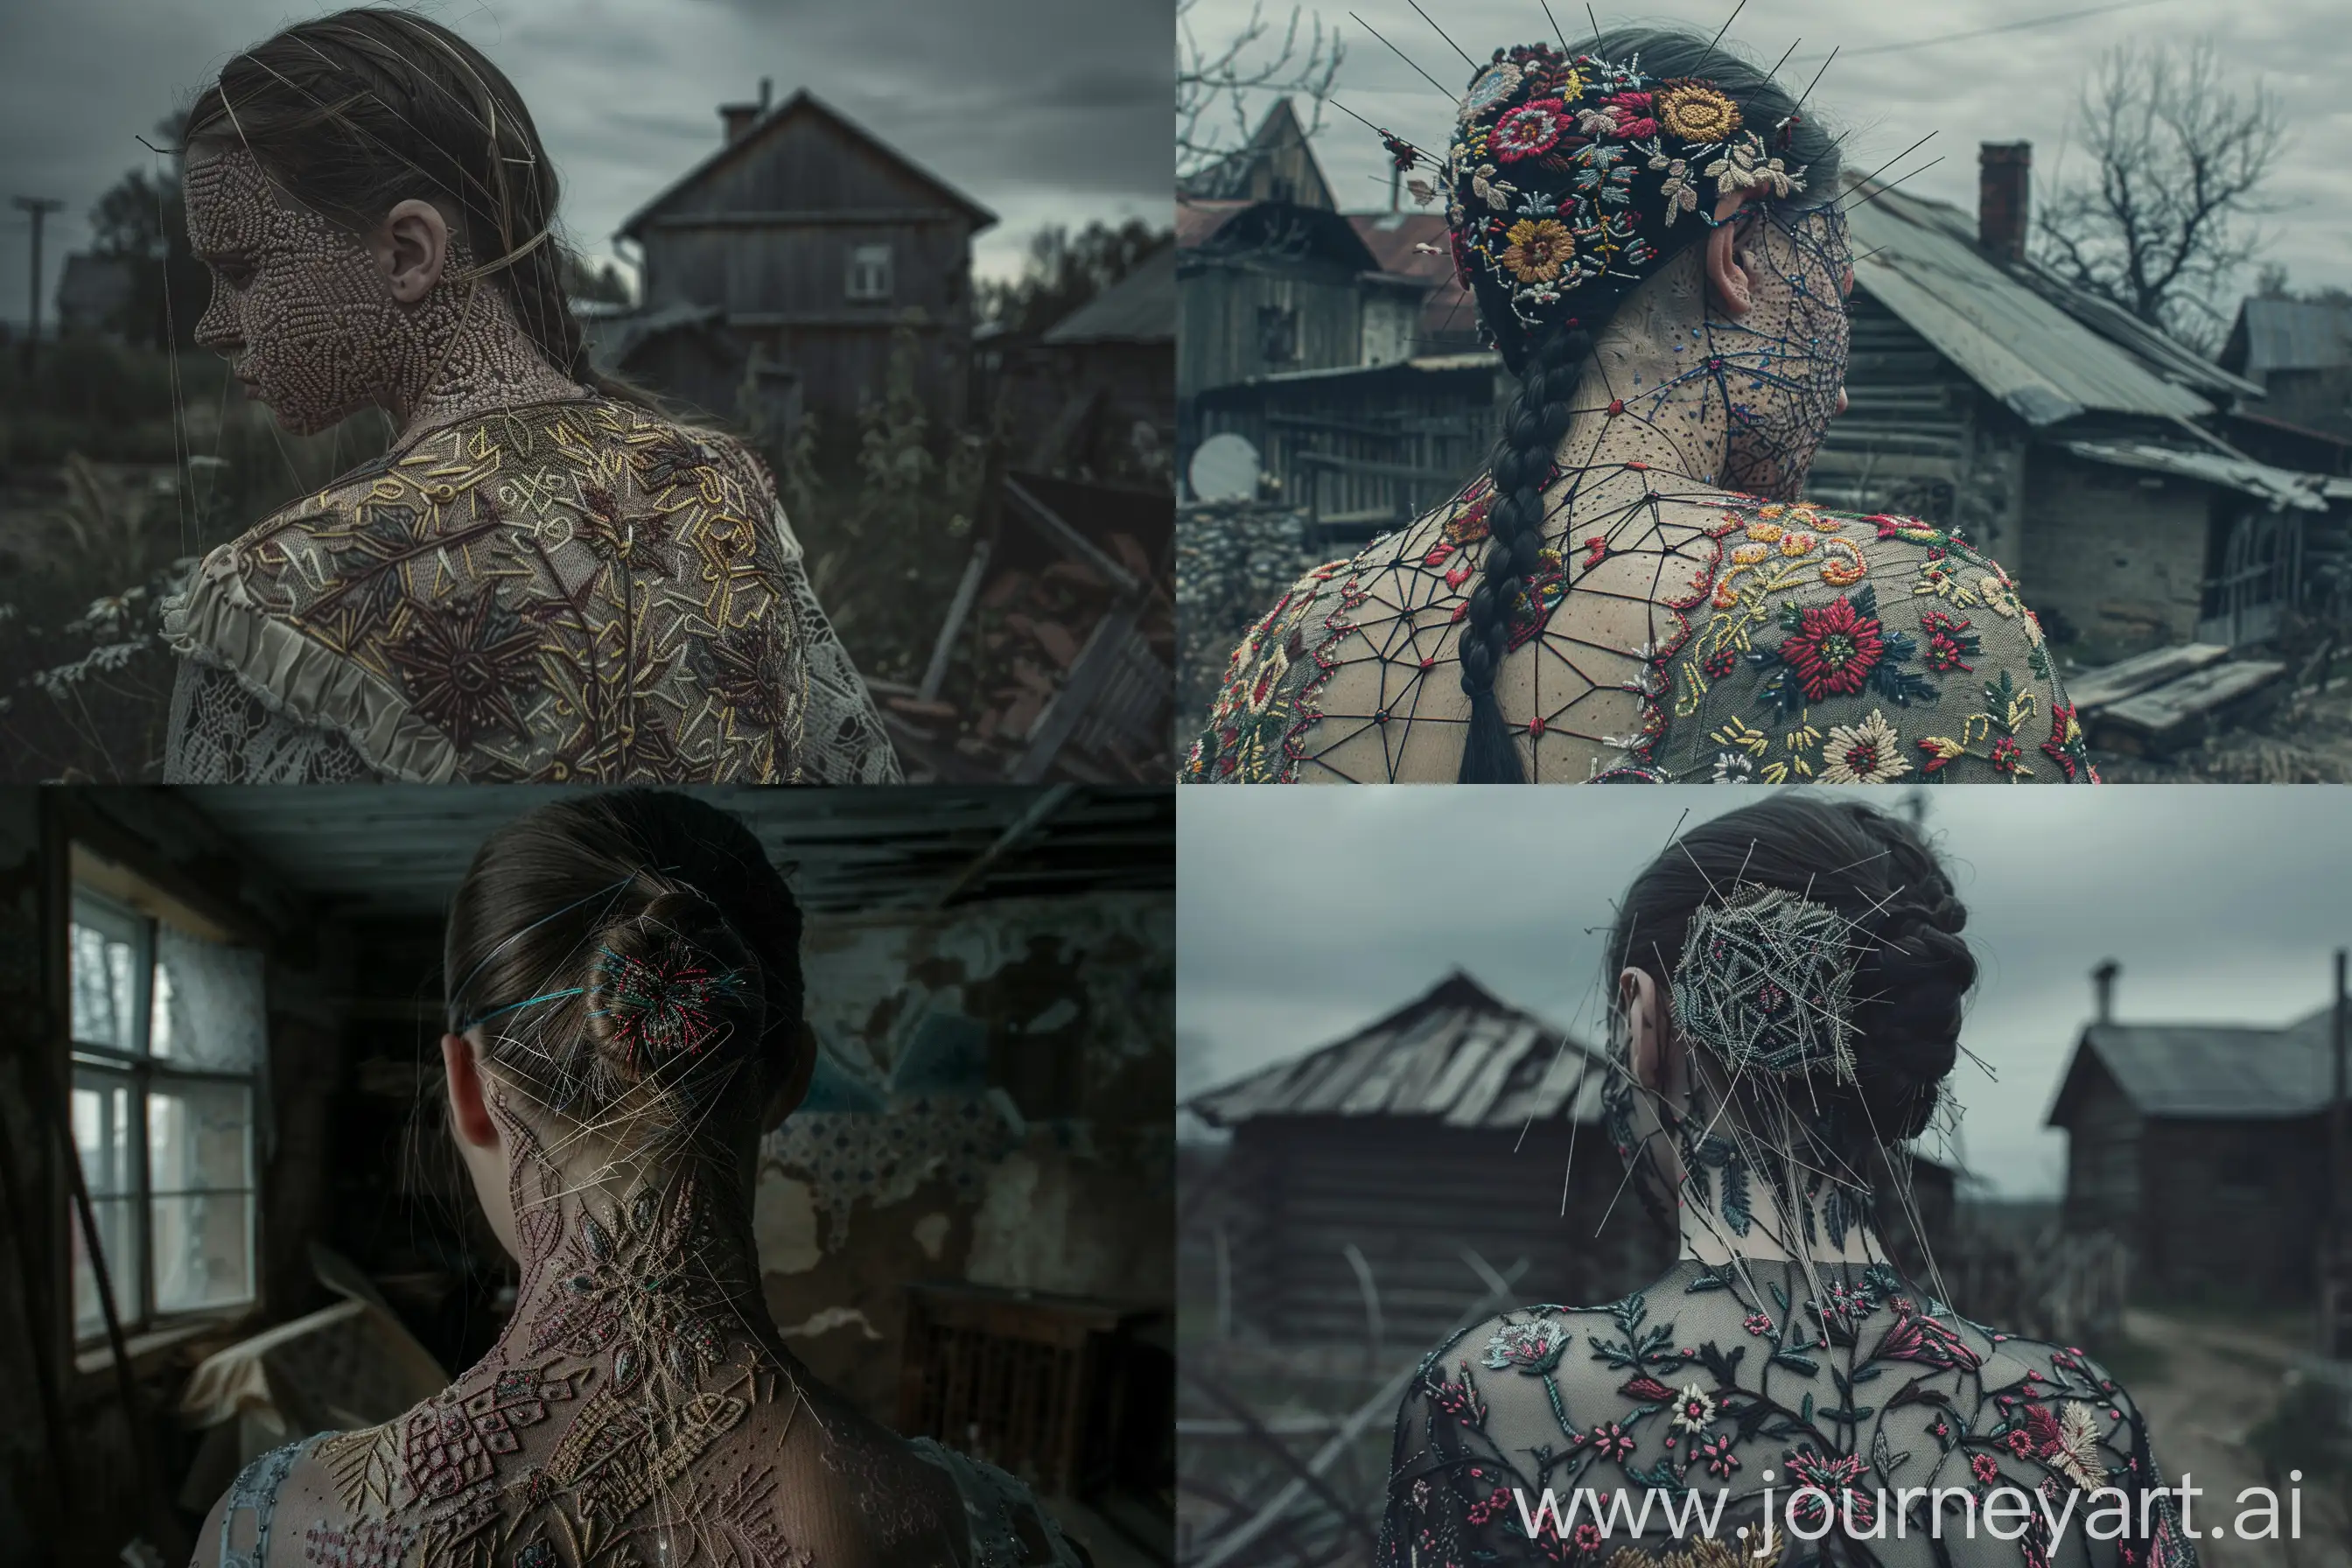 the whole face and back are permeated with painful threads in the style of Ukrainian national embroidery, embroidery on human skin, the skin on the back is permeated with ethnic Ukrainian patterns of the 19th century, deep emotions, hyper-realistic embroidery on the skin of the back, a very expressive look, threads sticking out of the skin, medium shot, lens 24 mm, general plan, gloomy dim lighting, grave condition, girl in an old Ukrainian farm house, --ar 3:2